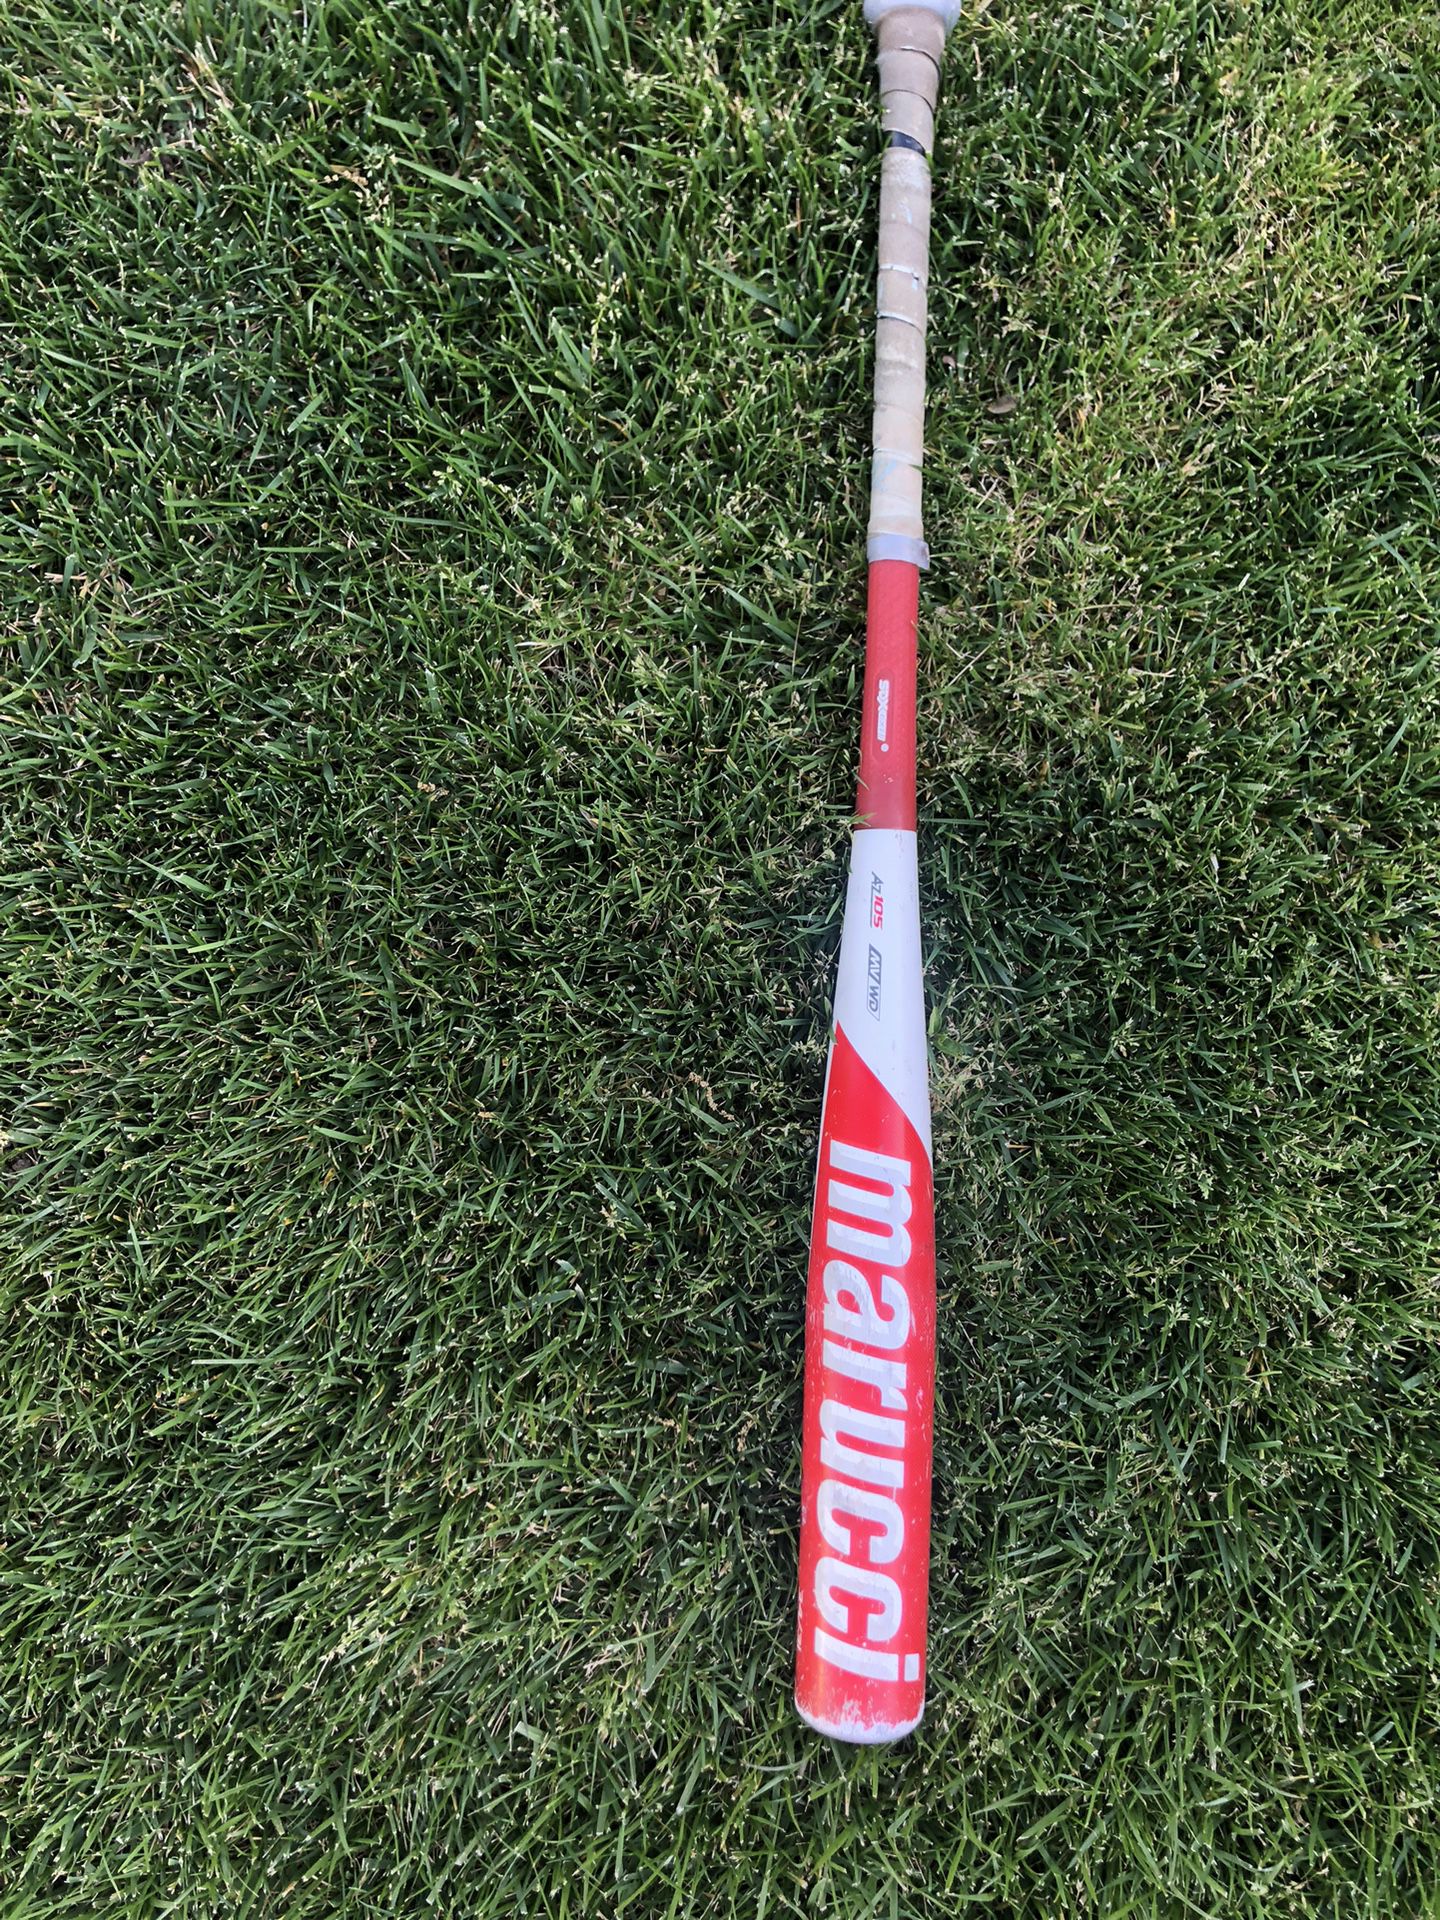 Cat 8 Connect & Rawlings Maple Bats